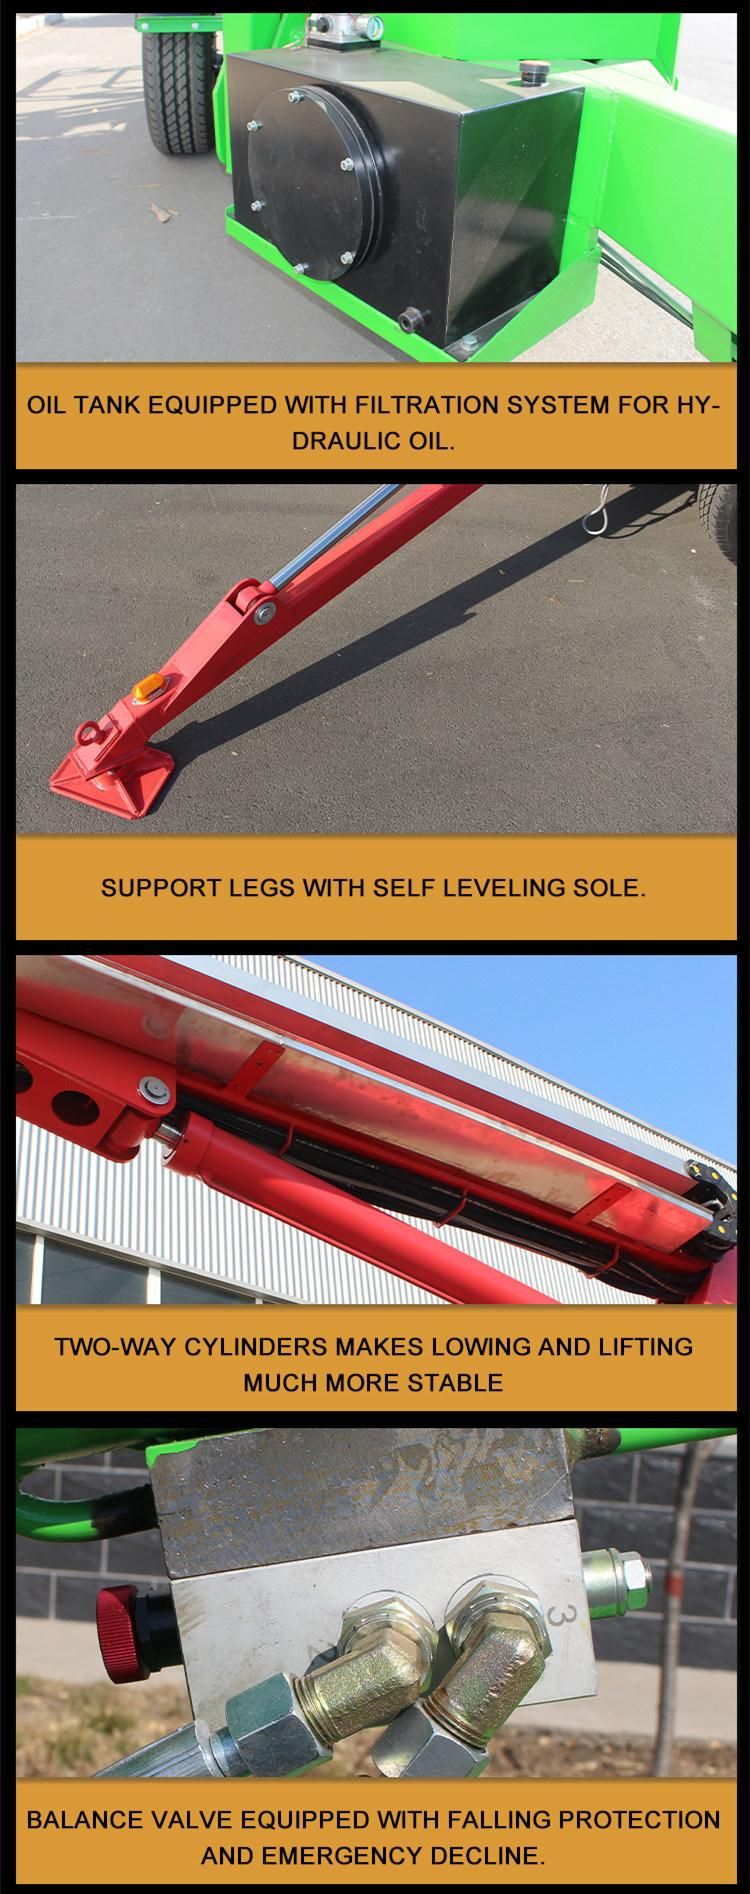 14m Load 200kg Drag Articulated Boom Lifting Tools Equipment Lifter Personal Electric Lift